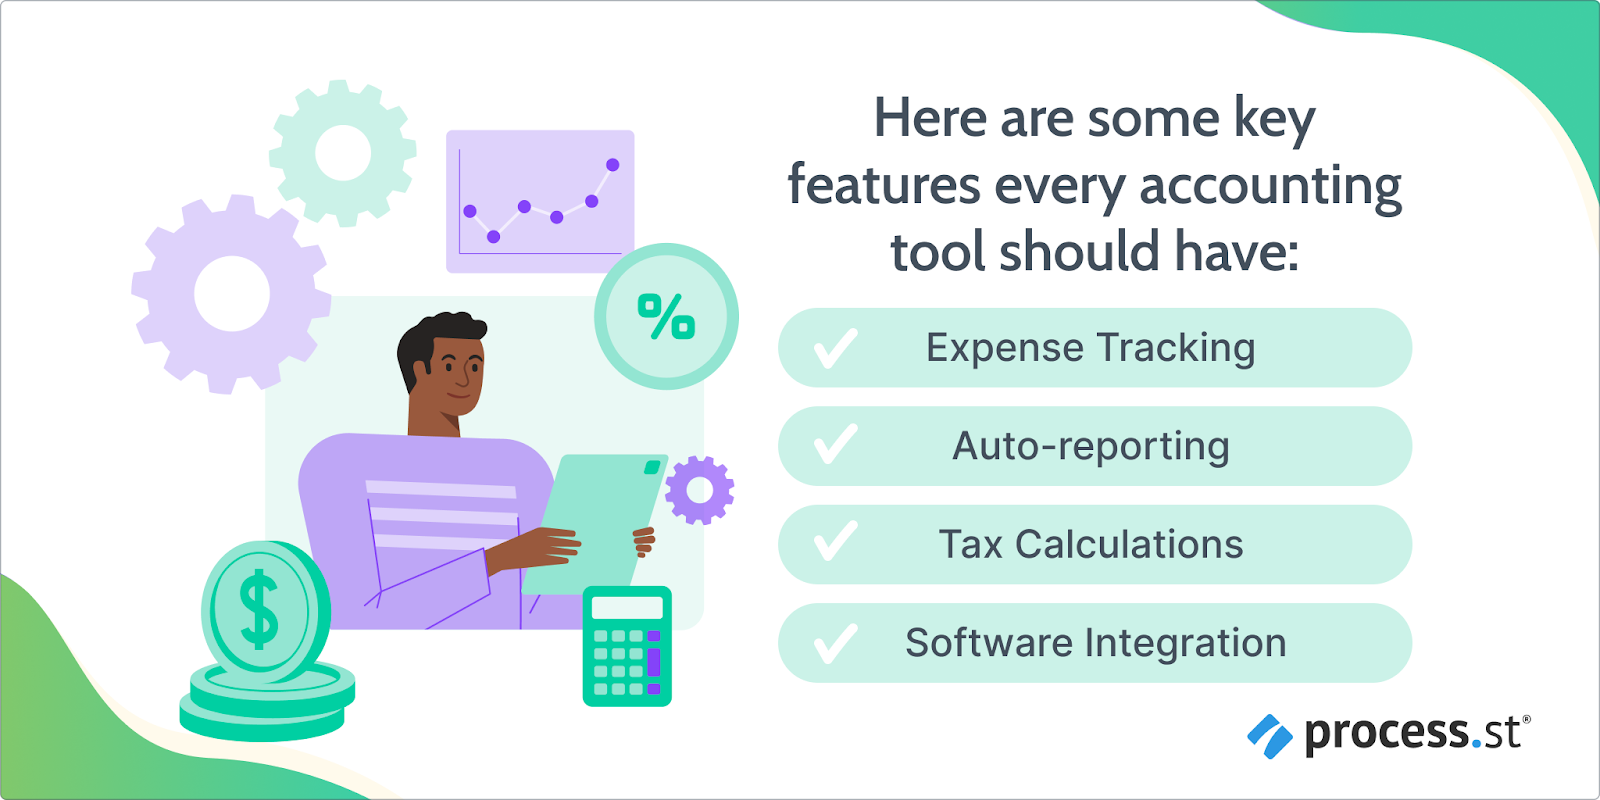 Image showing the features of accountant software tools